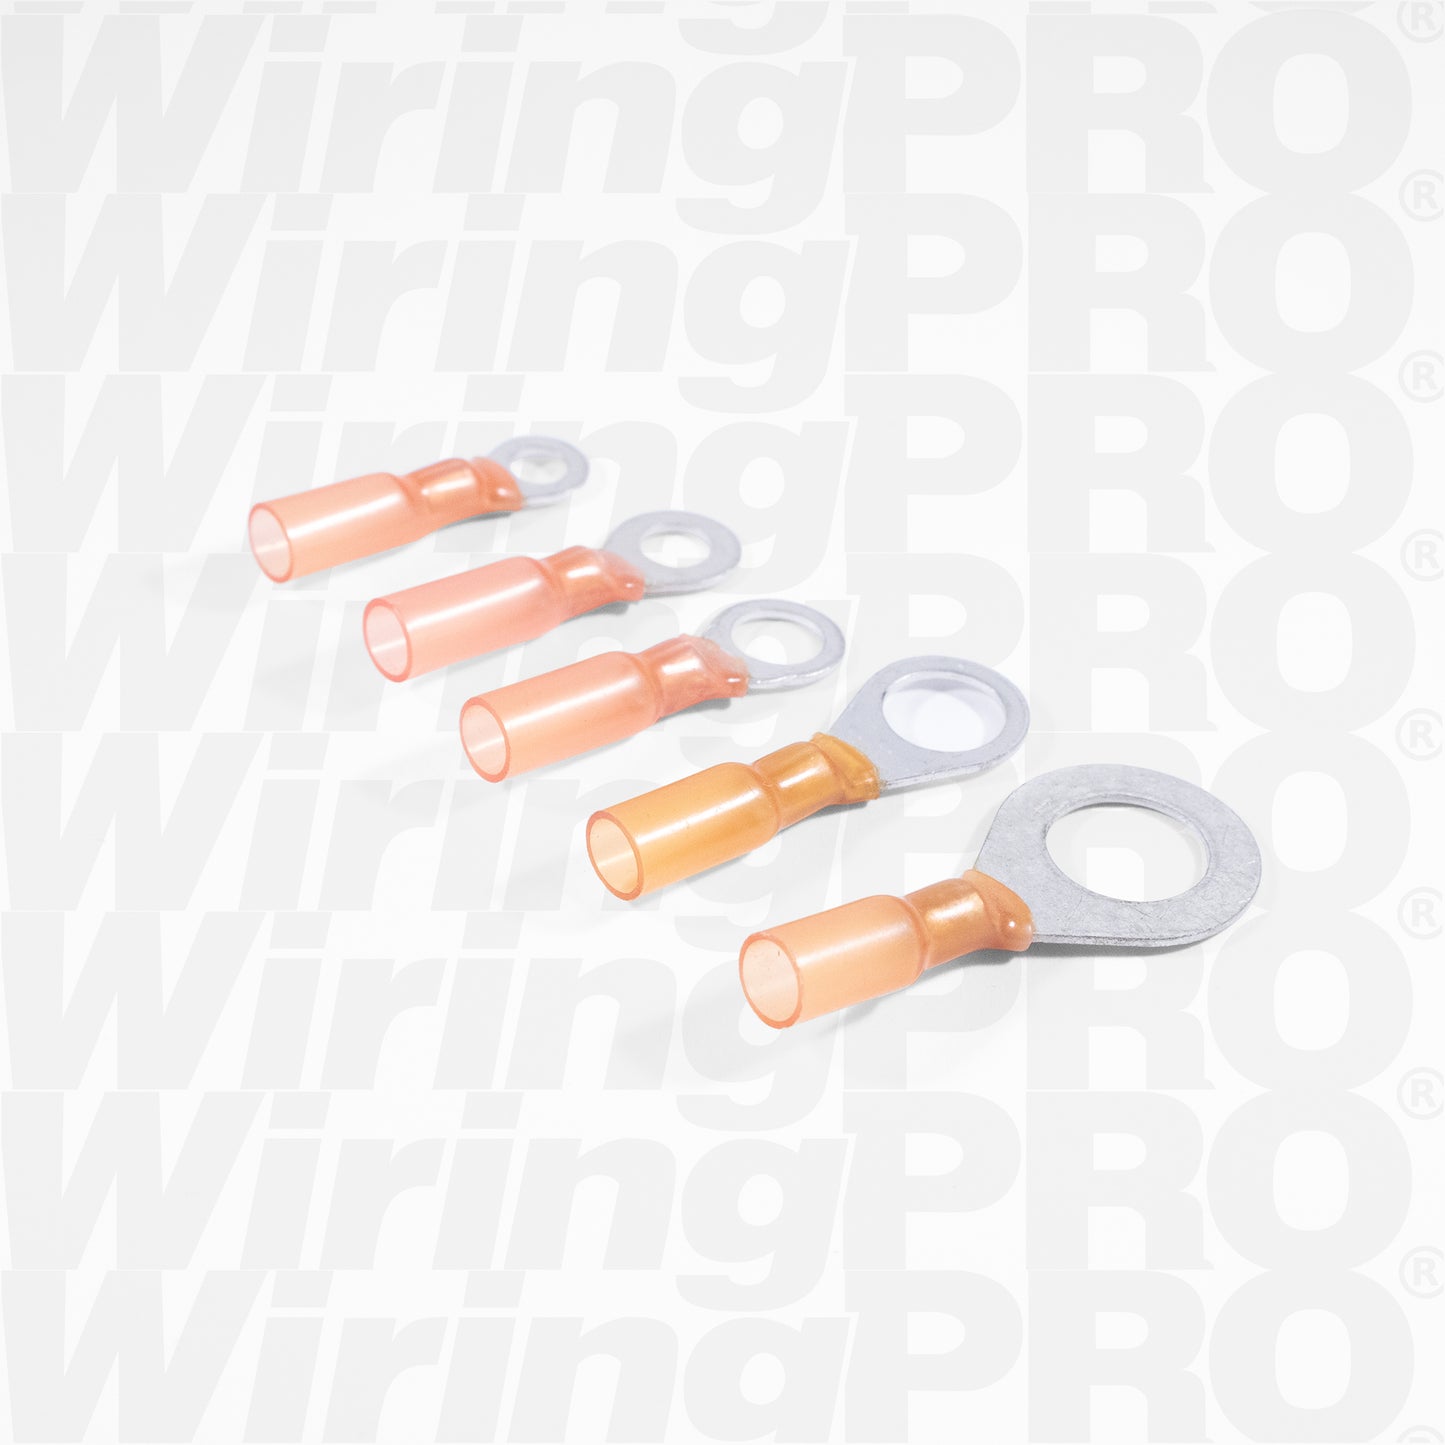 12-10 Ring Terminals - Heat Shrinkable